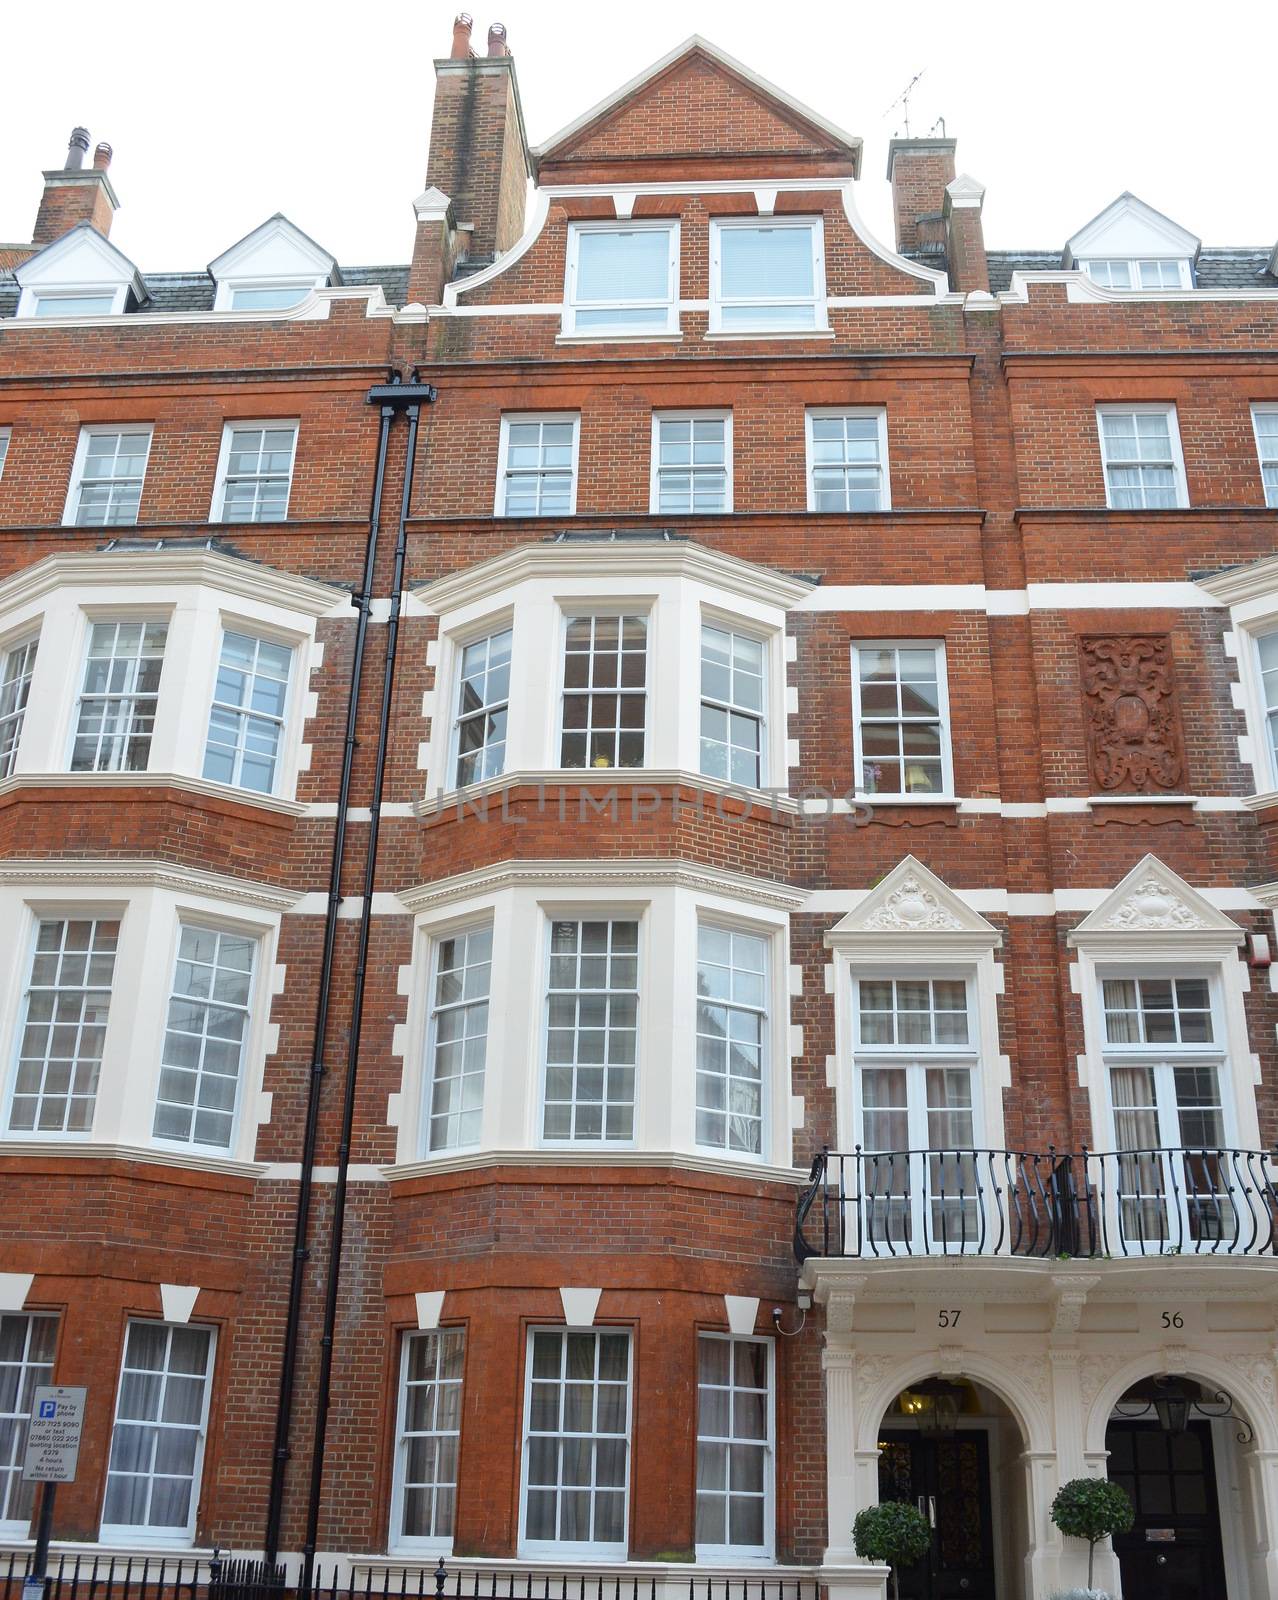 Beatles first London home by gorilla